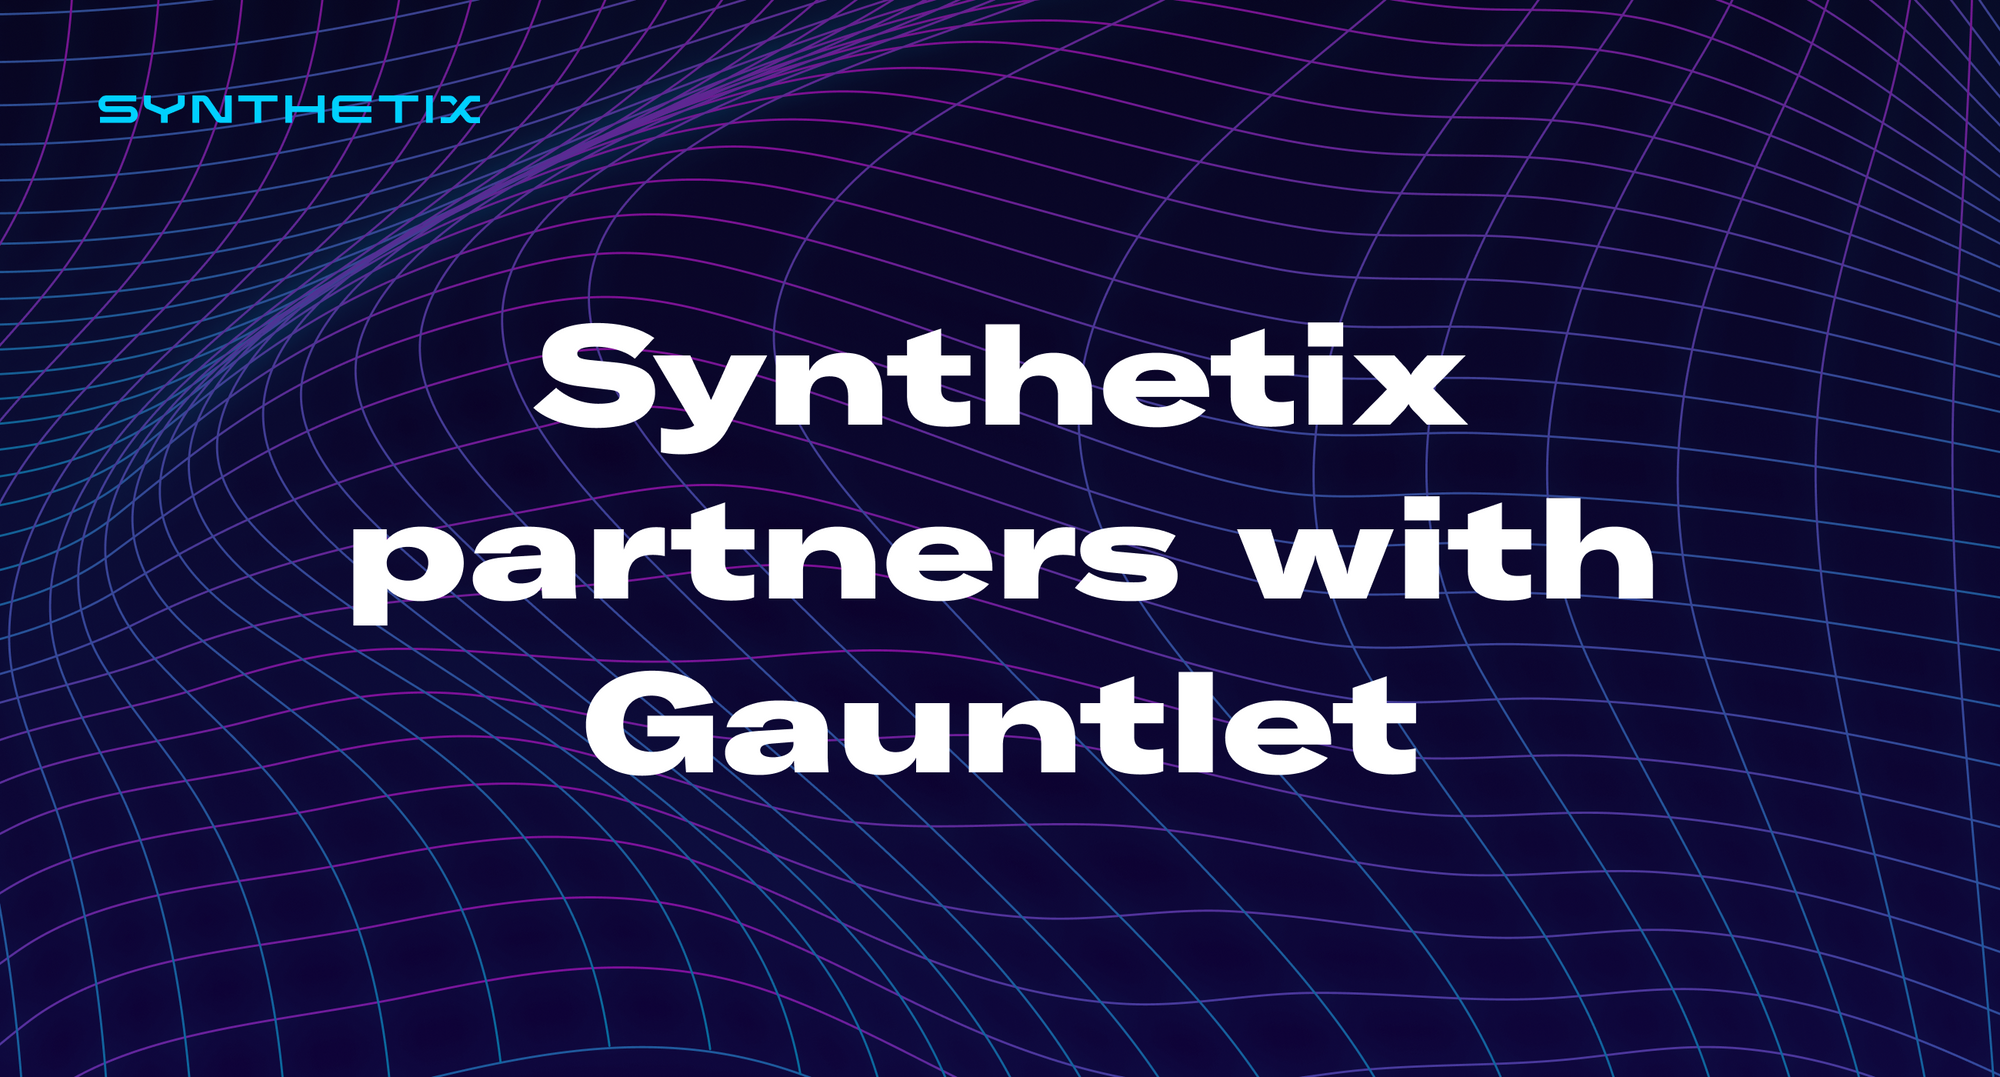 Synthetix partners with Gauntlet for risk management modeling